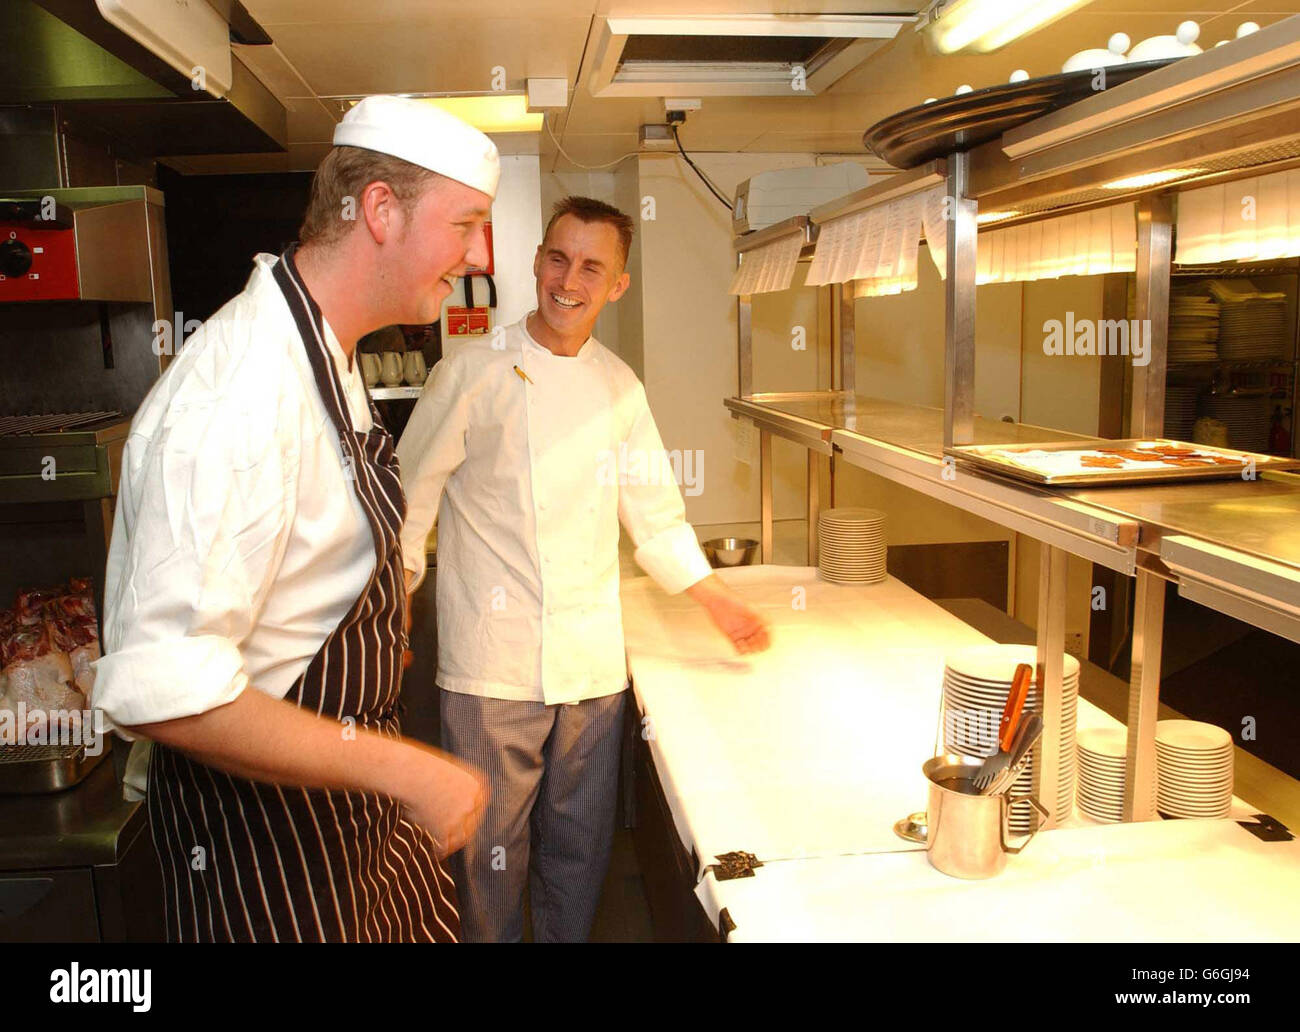 Chef Gary Rhodes in the kitchen during the launch of his Restaurant Rhodes Twenty Four, located on the 24th floor of the City of London's most impressive and tallest building Tower 42, Old Broad Street. Rhodes promises to bring back traditional Briish Crusine in an outstanding location, with its stunning views across the capital. Stock Photo